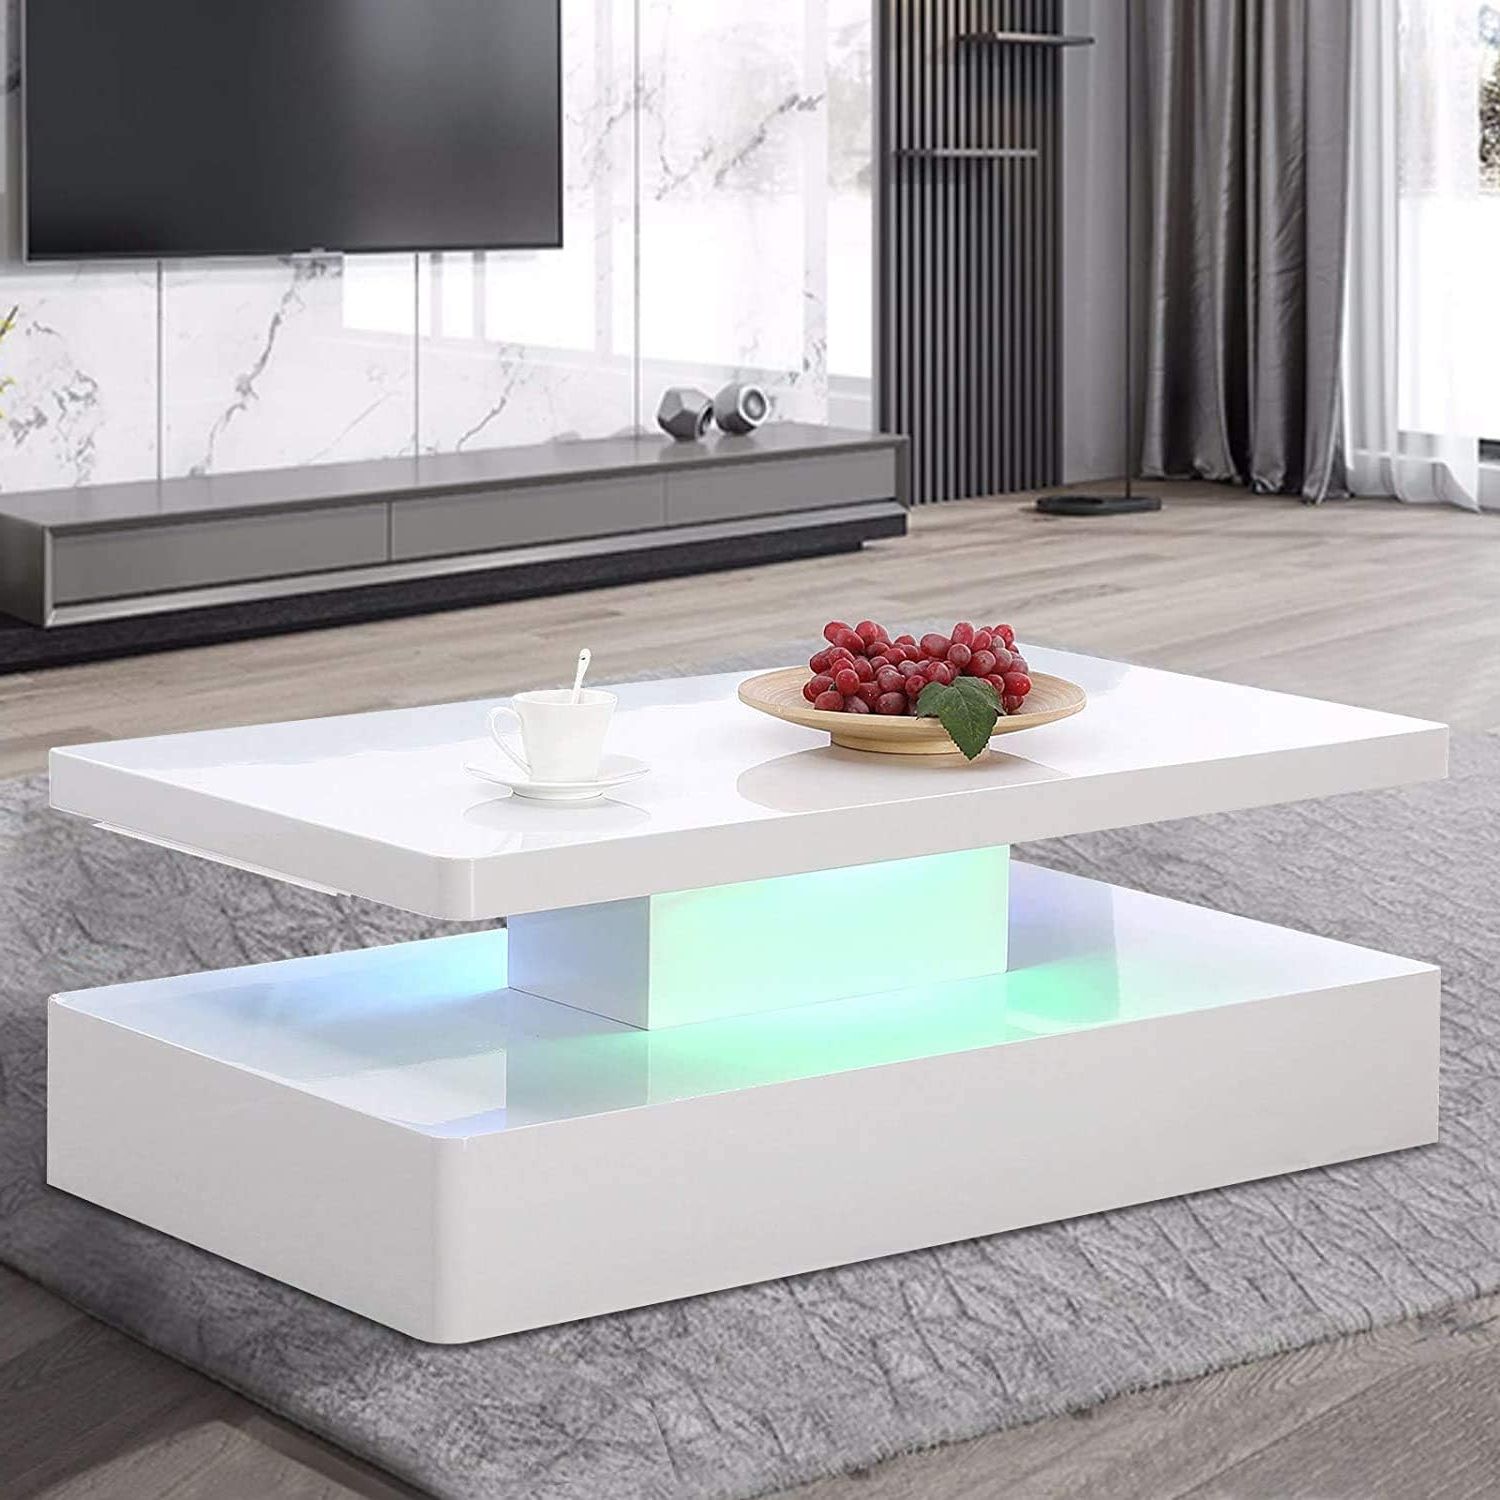 Preferred Amazon: Mecor Modern Glossy White Coffee Table W/led Lighting, 2 With Regard To Rectangular Led Coffee Tables (View 4 of 15)